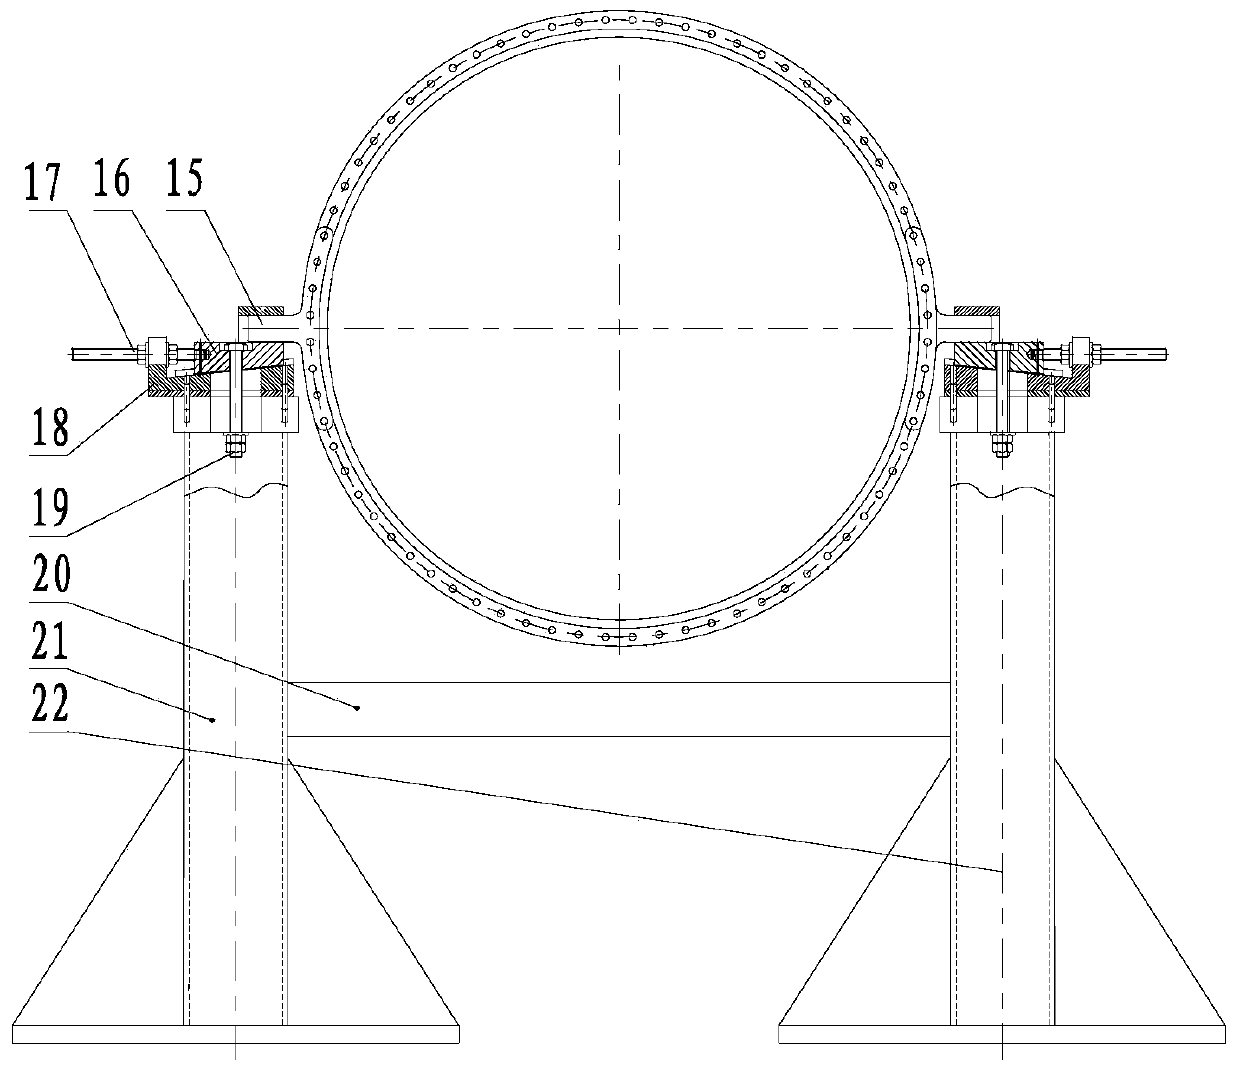 A Bench Installation Method for Performance Test of Aeronautical Axial Flow Compressor